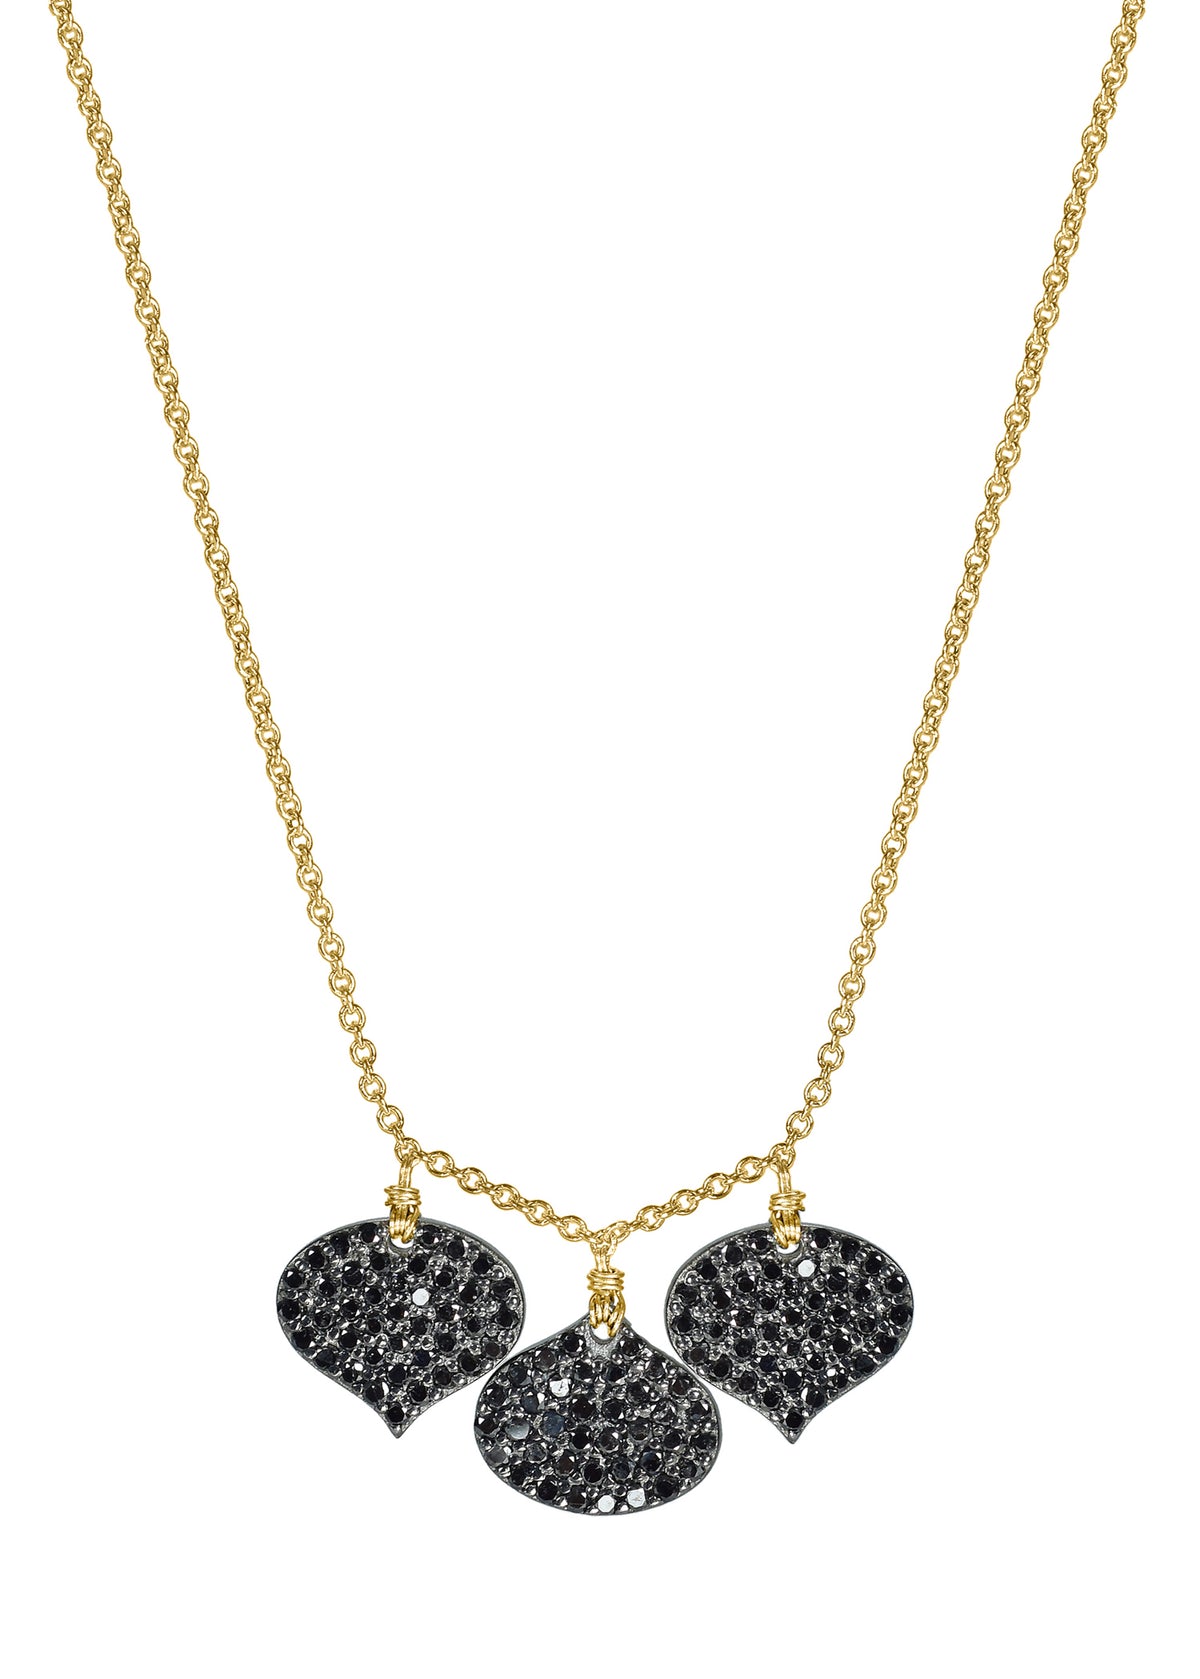 Black diamond 14k gold Sterling silver Mixed metal Special order only Necklace measures 16&quot; in length Pendants measure 3/8&quot; in length and 7/16&quot; in width at the widest point (x3) Handmade in our Los Angeles studio